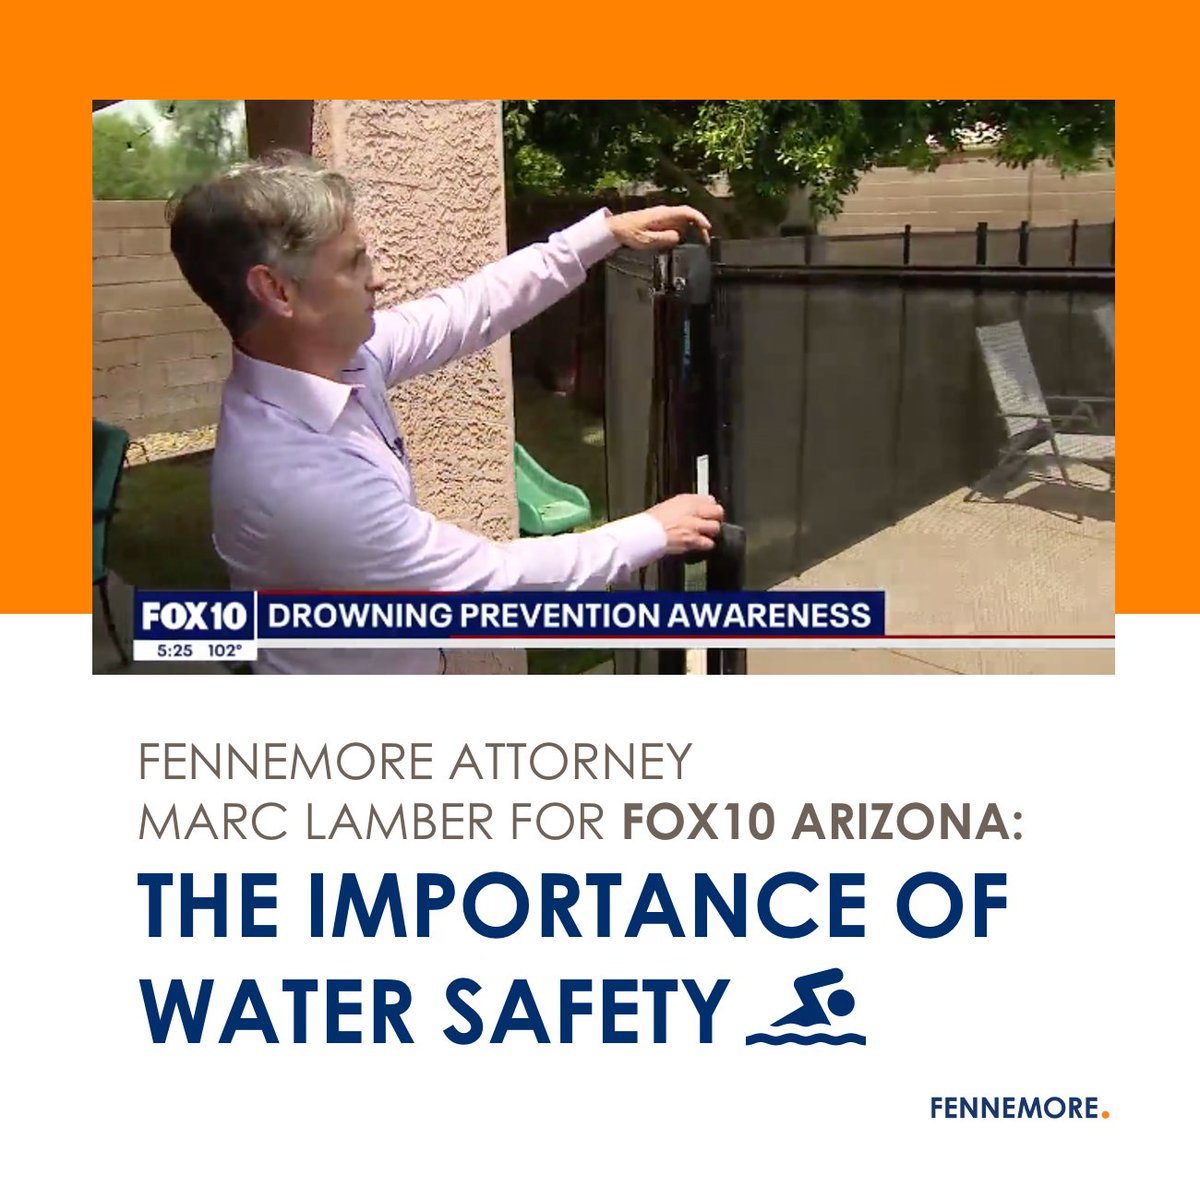 In an effort to bring public awareness to this situation, in a recent segment for FOX-10 News Arizona, Fennemore’s Jenny Pulliam and her son, Wyatt, along with attorney Marc Lamber discuss water safety, and watching your kids around water: https://t.co/wvHyYO80rE  #WaterSafety https://t.co/QBTjRfWnUm